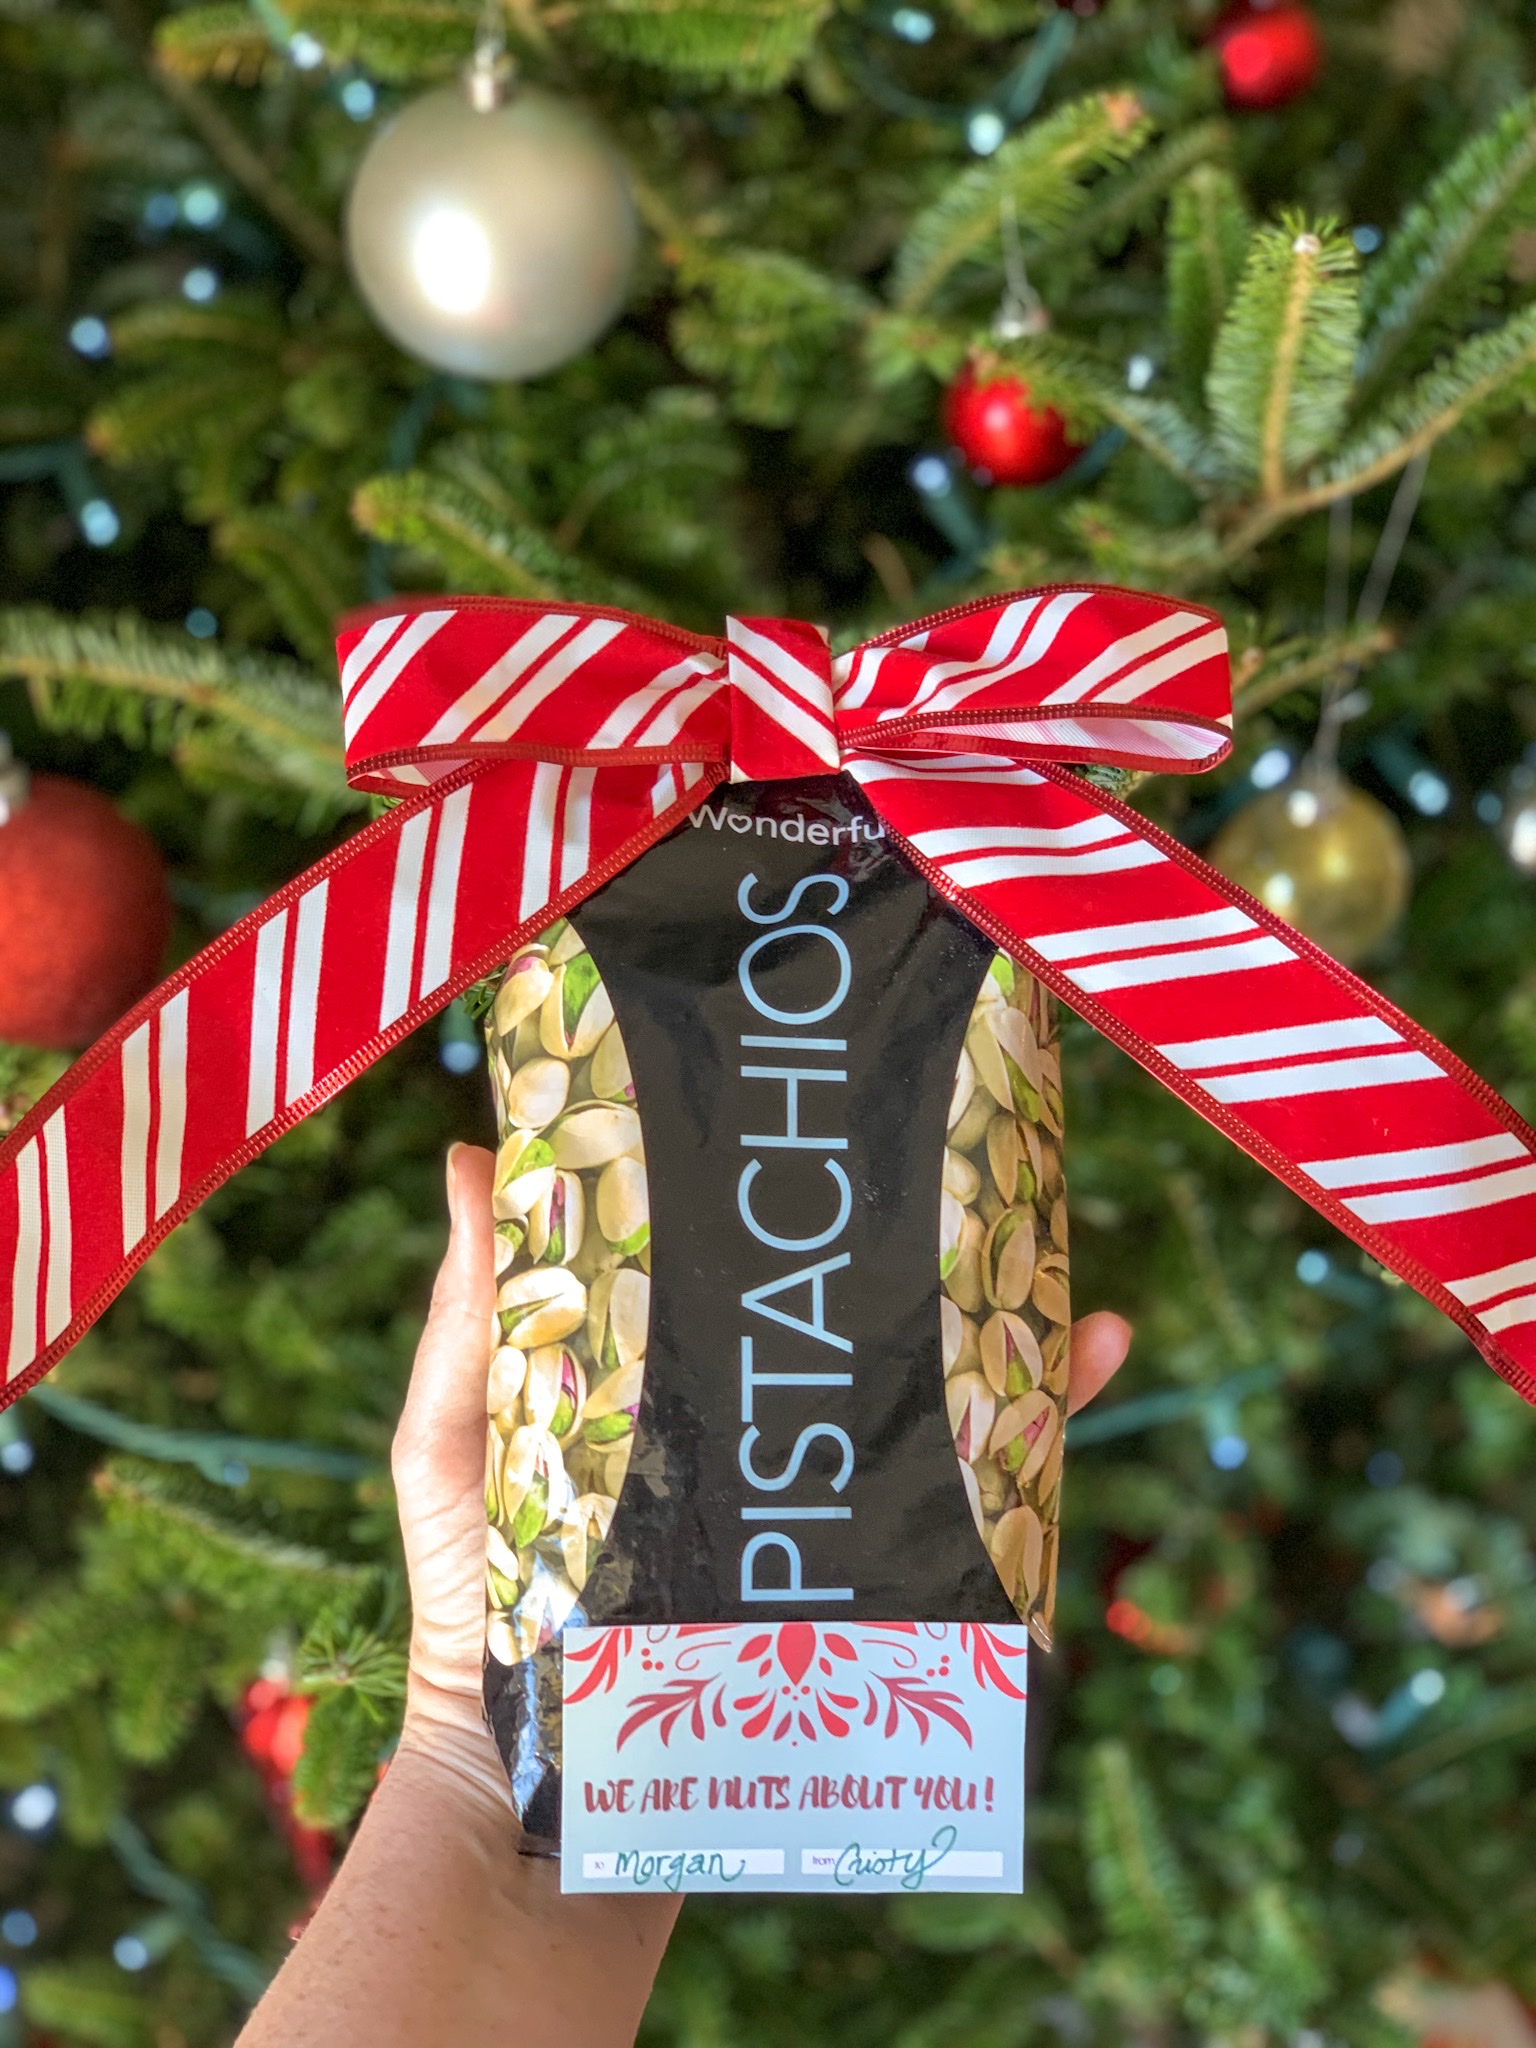 Gifts For Women That Do NOT Include Kitchen Items - The Pistachio